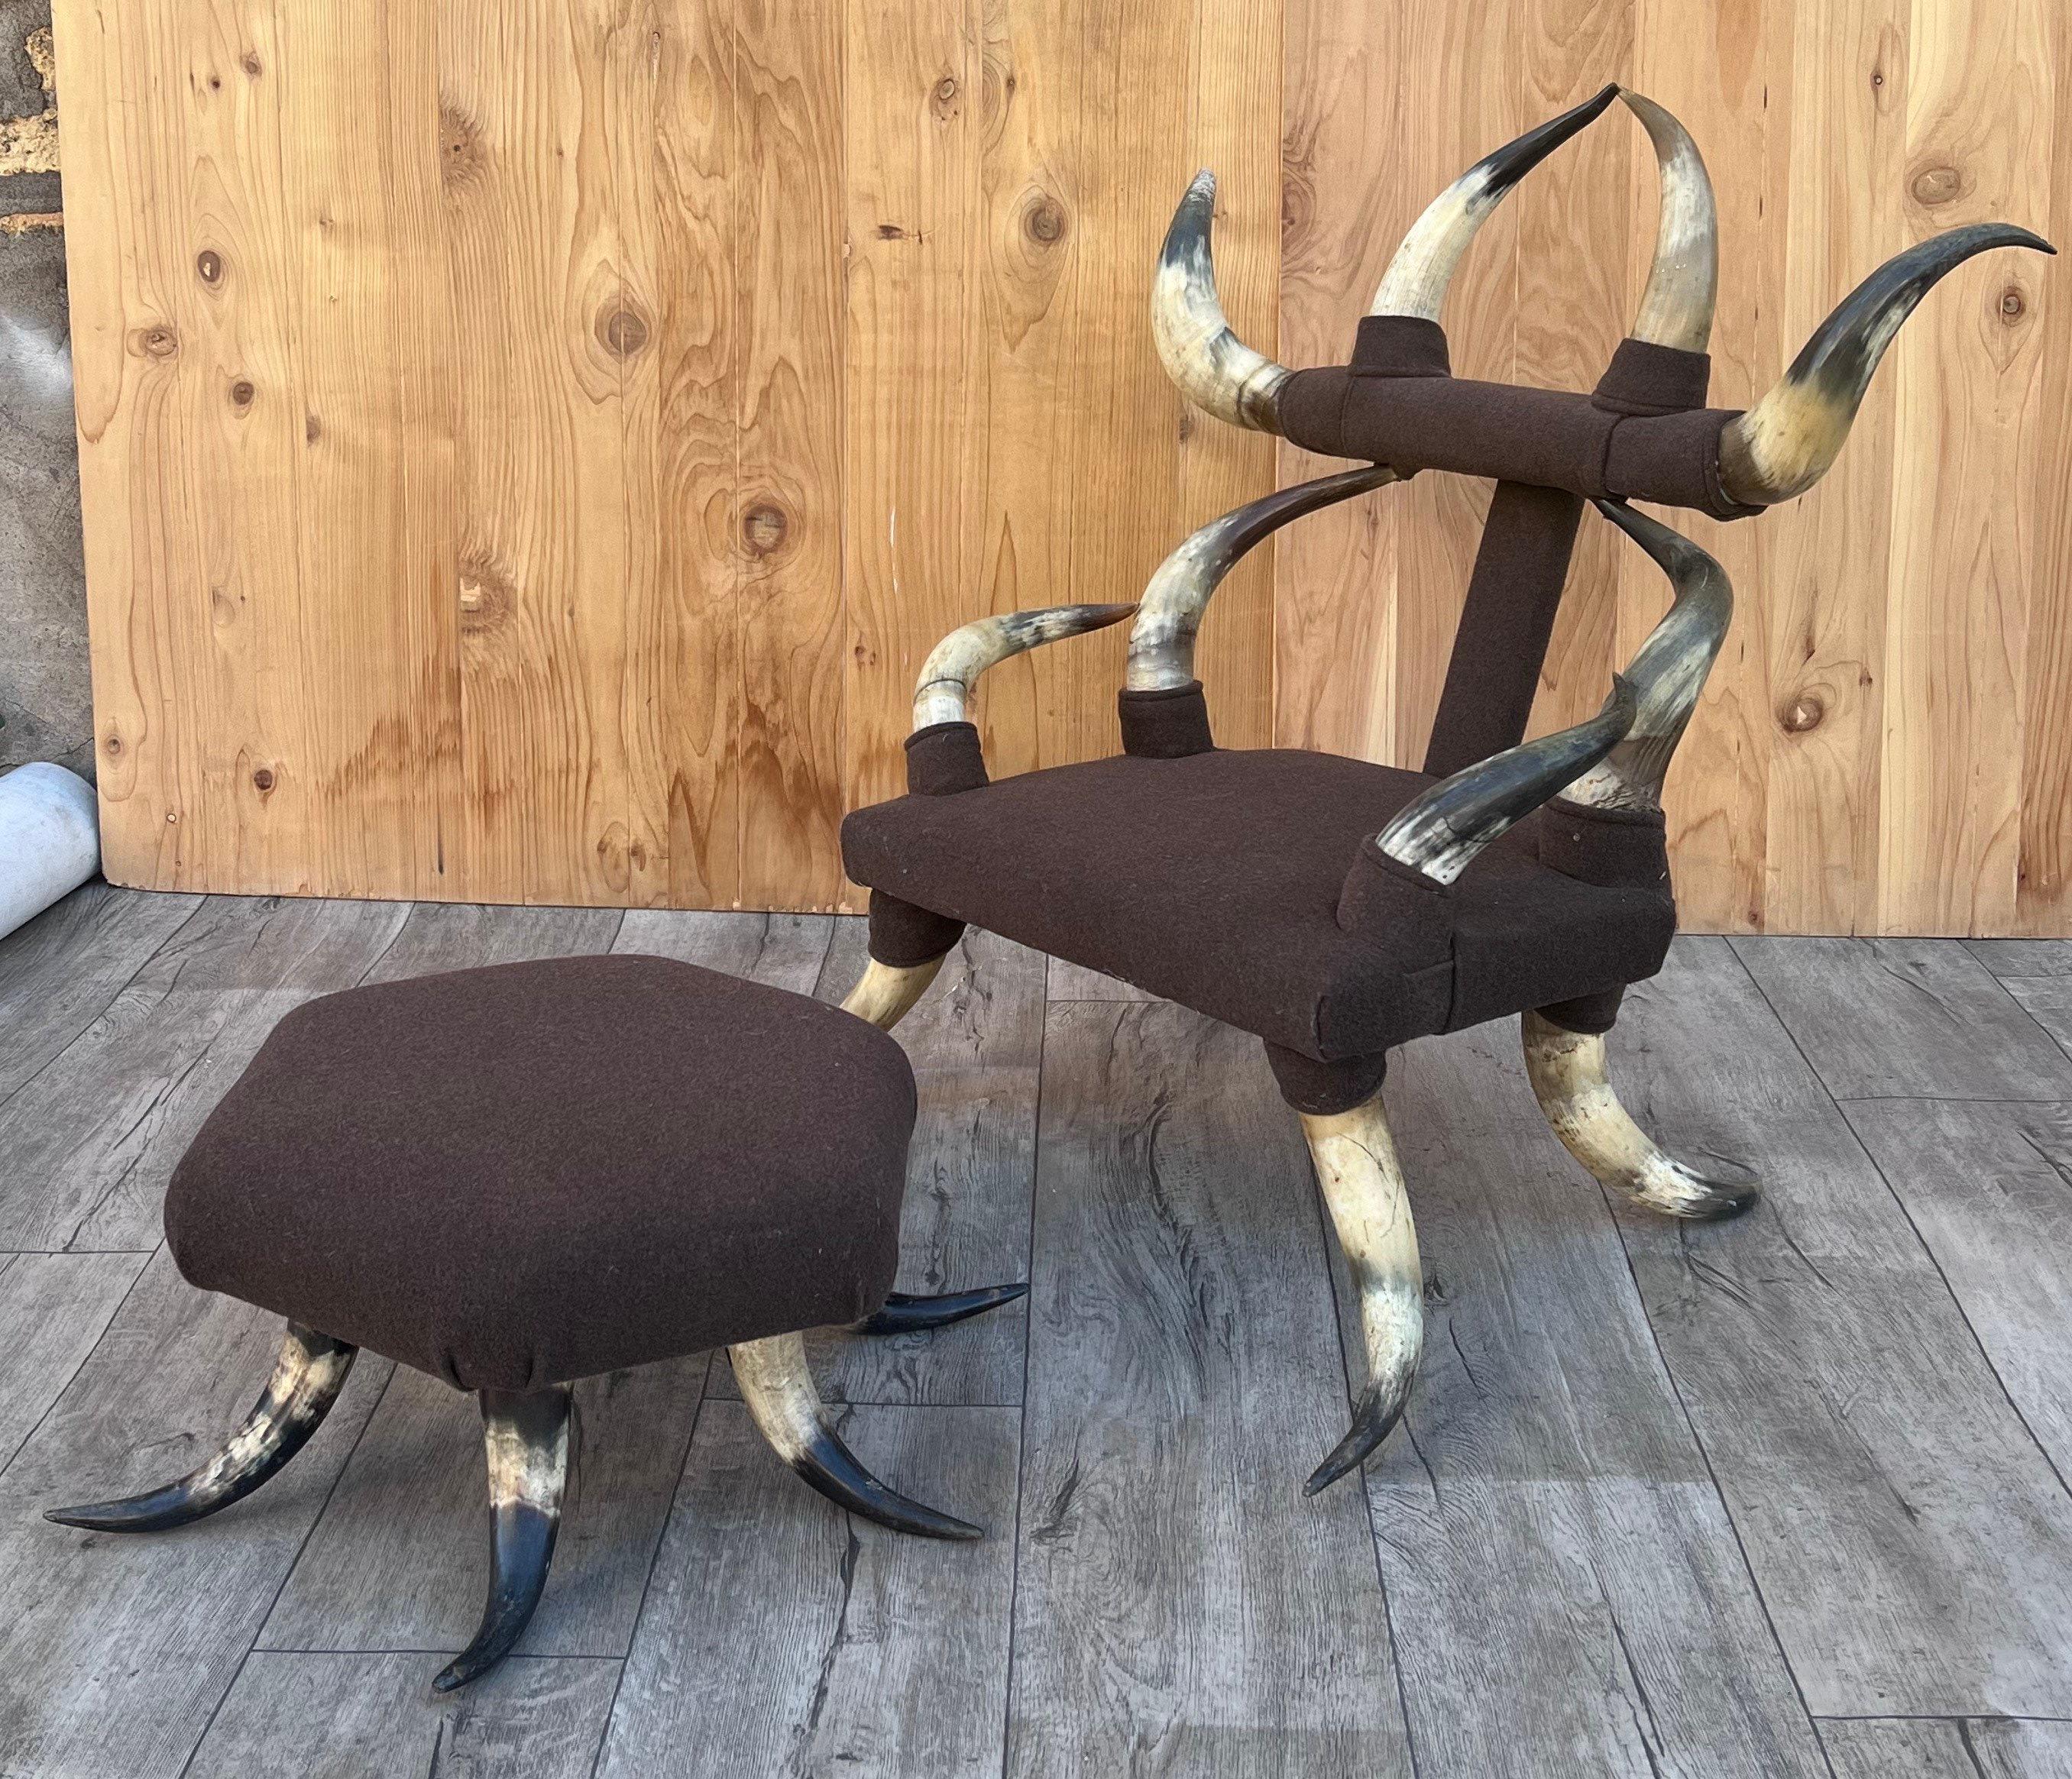 19th Century Antique Steer Horn Child's Chair with Ottoman in Original Upholstery - Set of 2